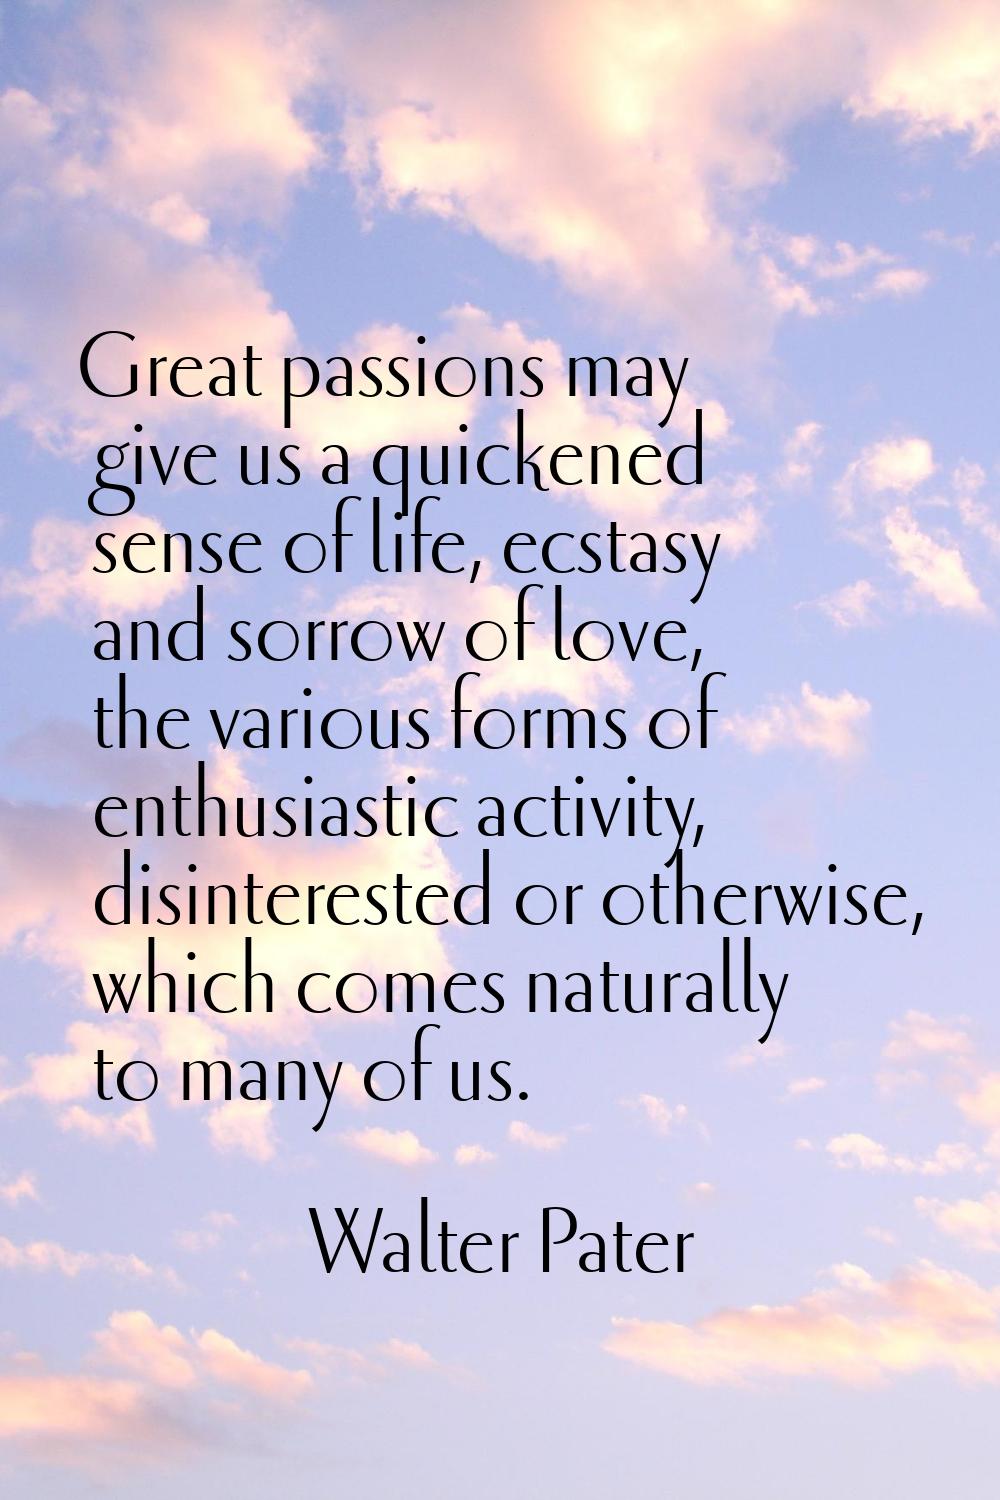 Great passions may give us a quickened sense of life, ecstasy and sorrow of love, the various forms